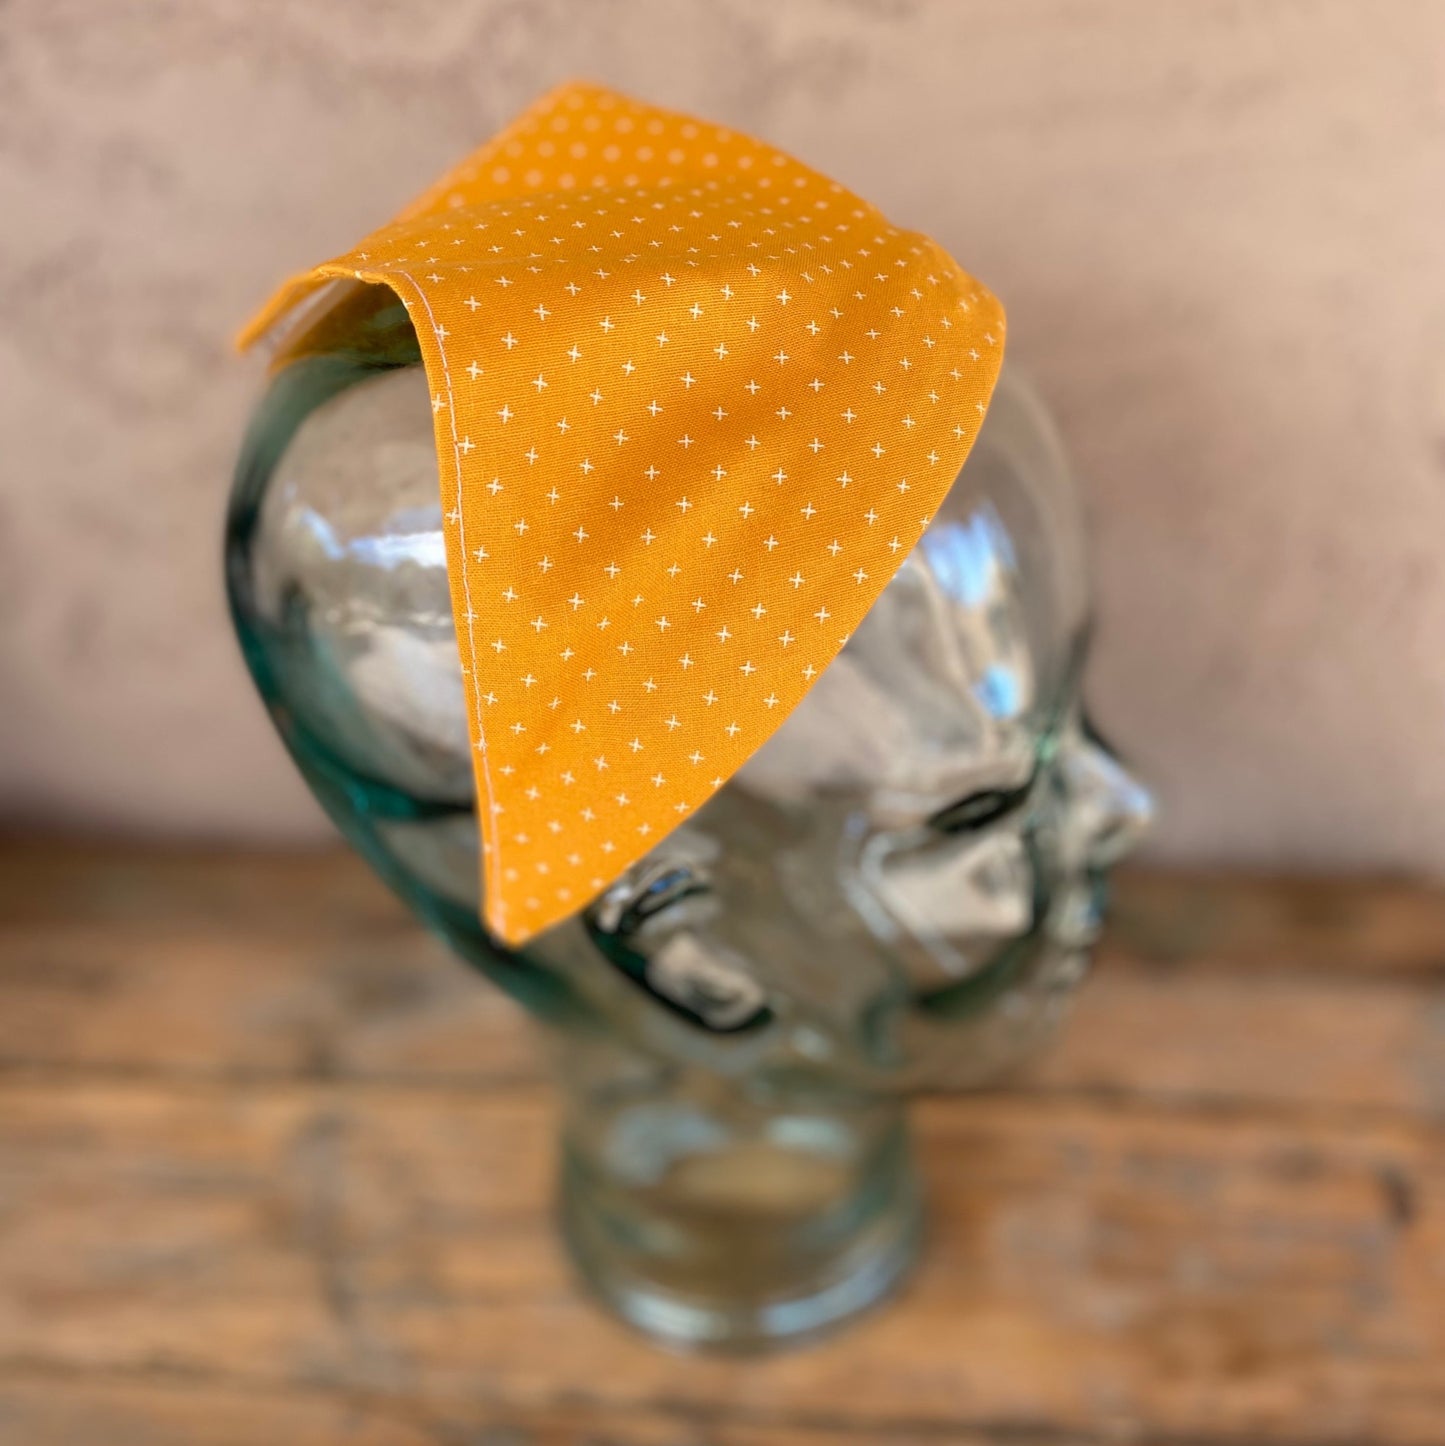 Headband that has scarf attached. It is mustard yellow with small white criss cross shapes.